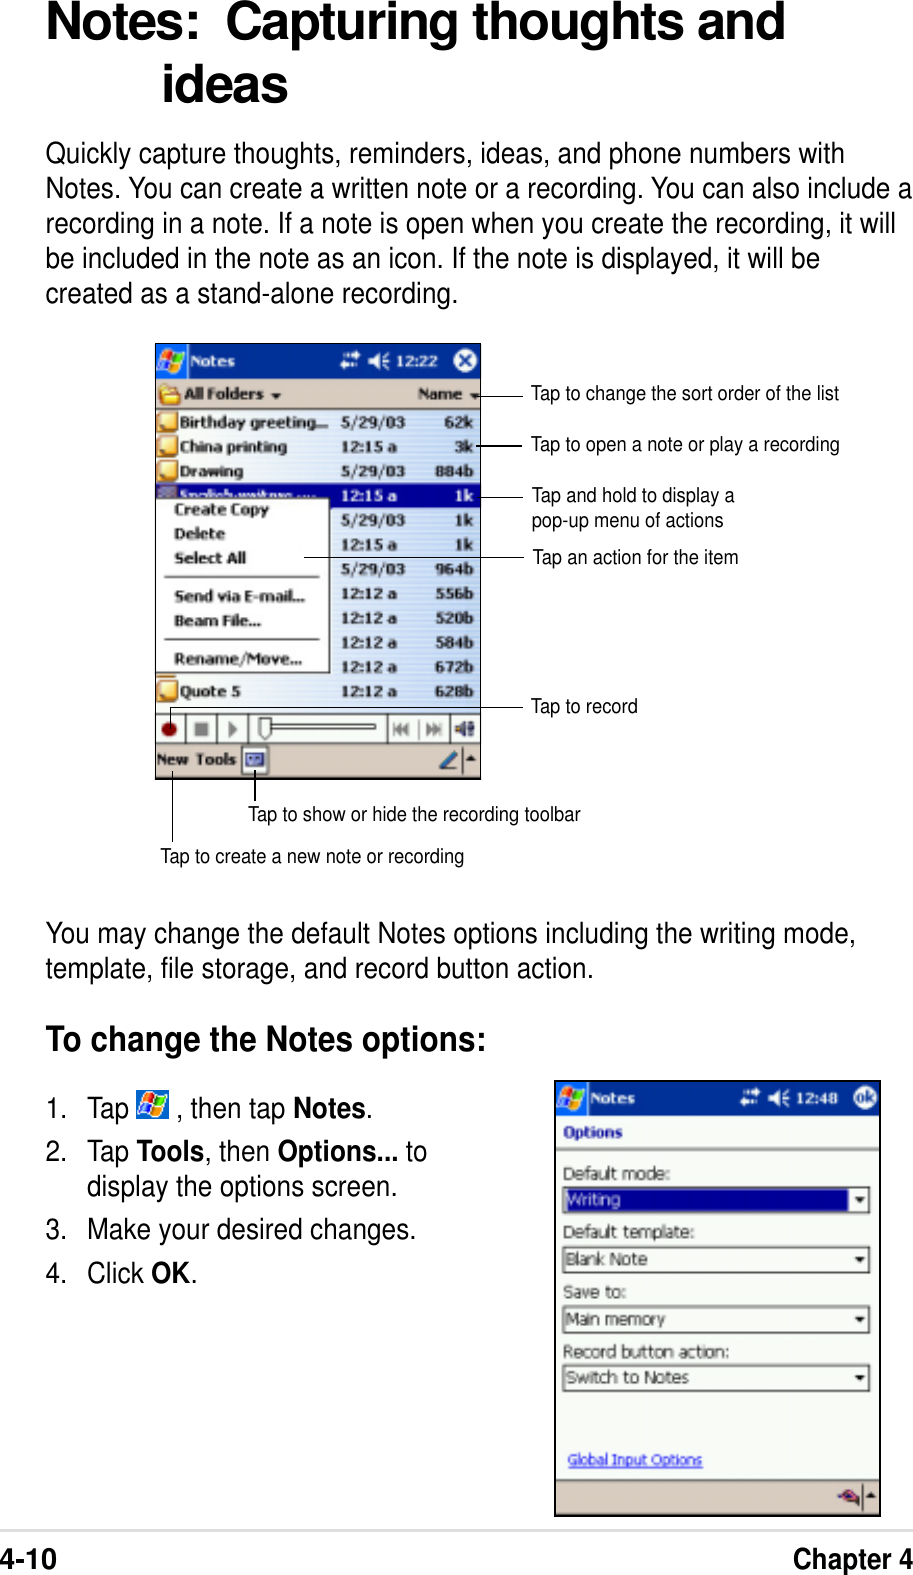 4-10Chapter 4Notes:  Capturing thoughts andideasQuickly capture thoughts, reminders, ideas, and phone numbers withNotes. You can create a written note or a recording. You can also include arecording in a note. If a note is open when you create the recording, it willbe included in the note as an icon. If the note is displayed, it will becreated as a stand-alone recording.Tap to change the sort order of the listTap to open a note or play a recordingTap to recordTap to show or hide the recording toolbarTap to create a new note or recordingTap and hold to display apop-up menu of actionsTap an action for the itemYou may change the default Notes options including the writing mode,template, file storage, and record button action.To change the Notes options:1. Tap   , then tap Notes.2. Tap Tools, then Options... todisplay the options screen.3. Make your desired changes.4. Click OK.